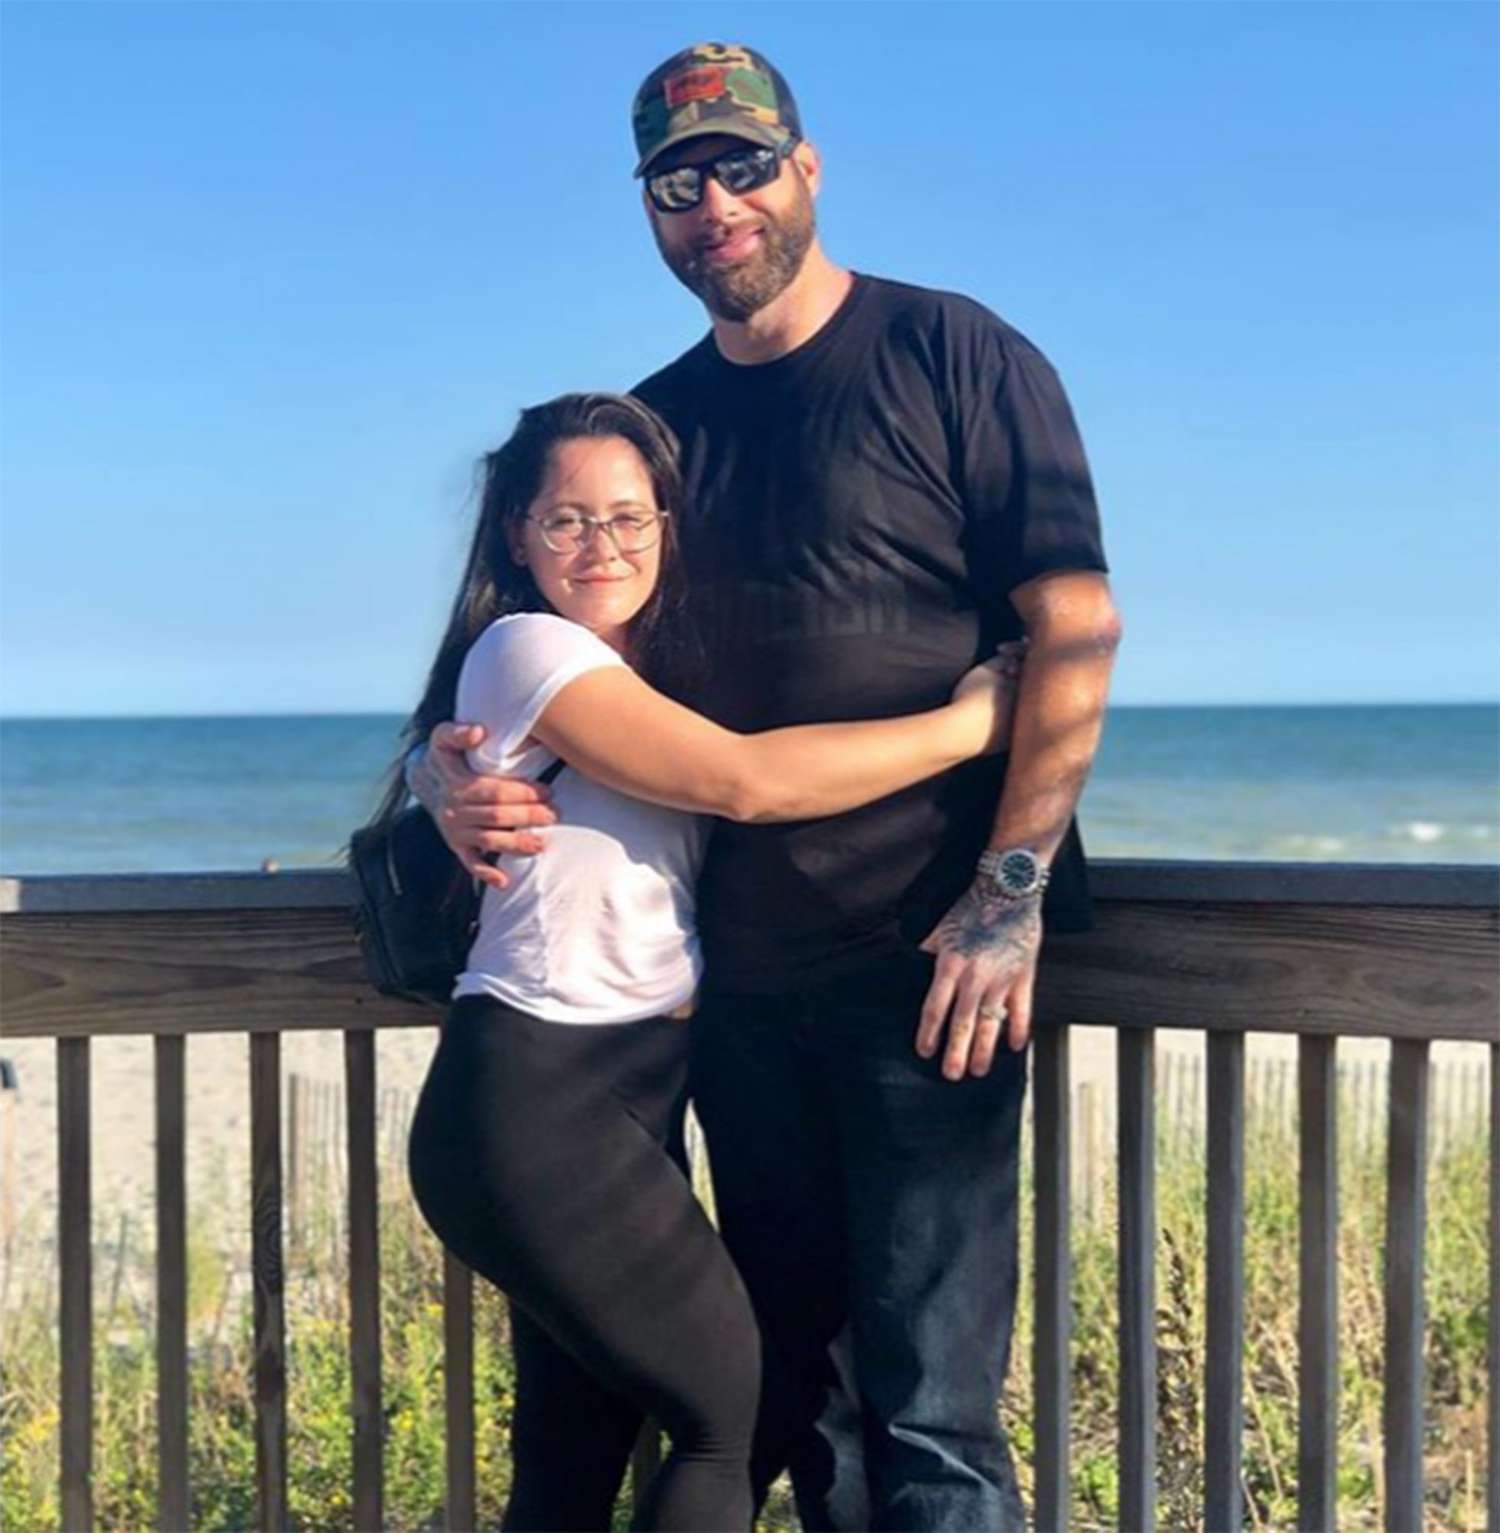 <p>After two years of marriage, the Teen Mom 2 star filed for divorce from Eason.</p>
                            <p>Evans announced the split on Instagram on Oct. 31, writing, "The kids and I have moved away from David. Nobody gets into a marriage expecting it to end but I know that's what is best for me, and for my kids. Today I have filed papers to start that process."</p>
                            <p>She also shared how she's reflected on her life since being fired from Teen Mom 2 after Eason allegedly shot and killed their dog earlier this year, writing, "Like anyone else I want what's best for my kids and I want to be happy. With the time I took away from Teen mom I've started looking at my life differently and I know I need to make changes. I'm starting now."</p>
                            